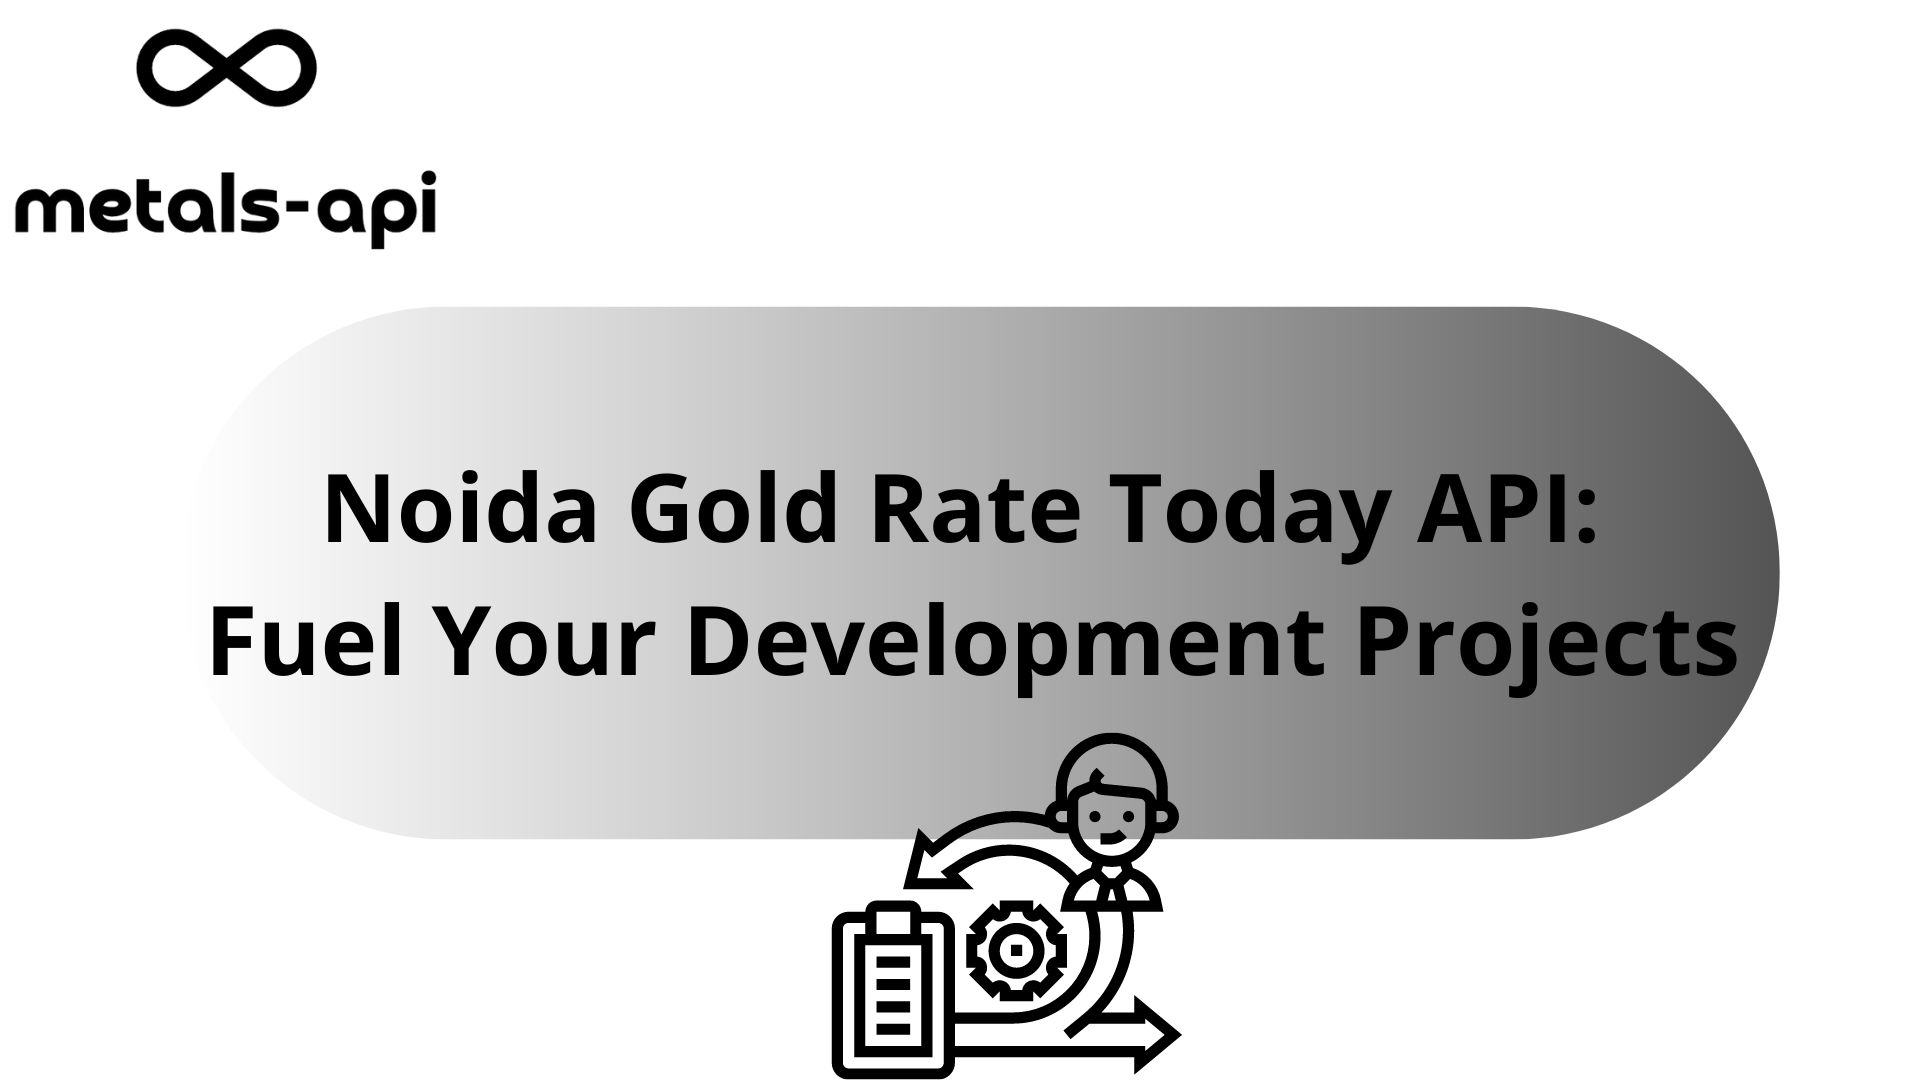 Noida Gold Rate Today API: Fuel Your Development Projects